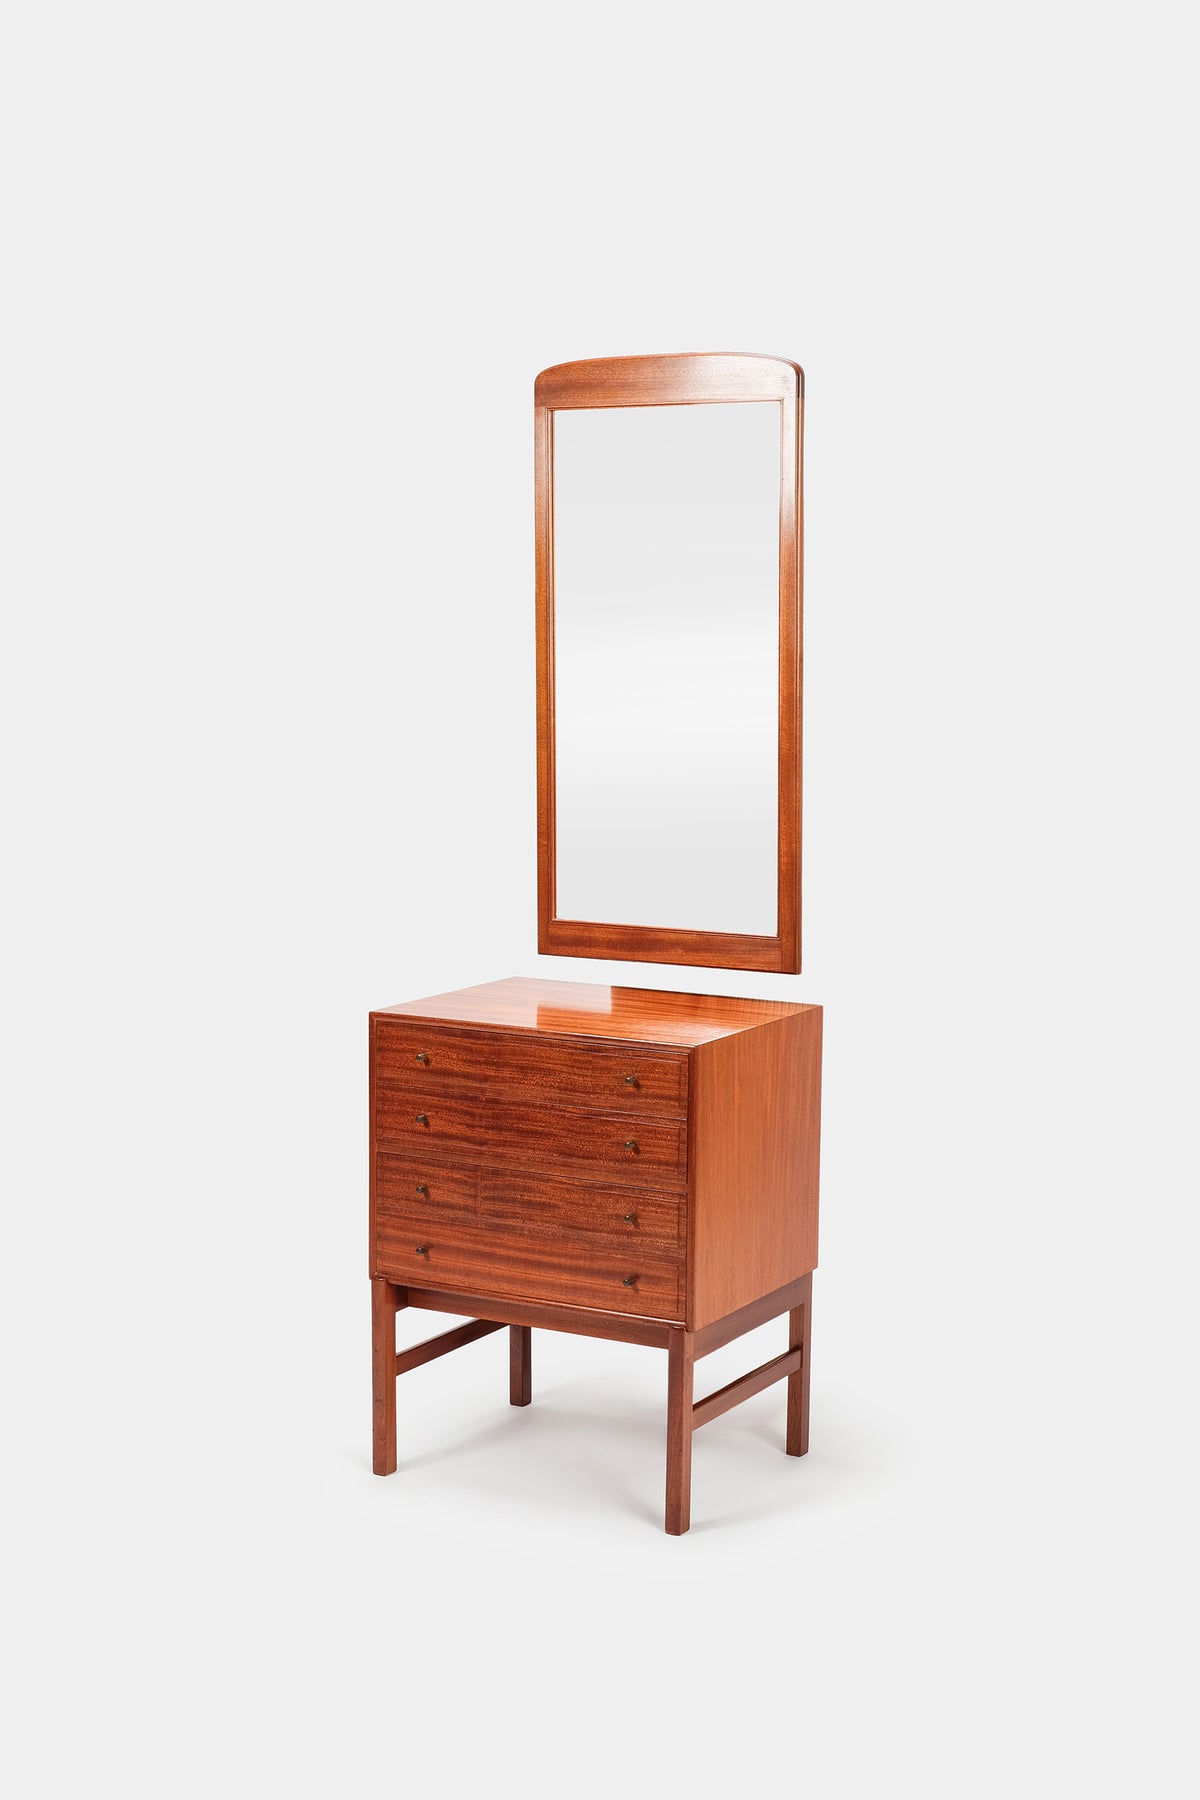 Ole Wanscher, Chest of Drawers with Mirror, A. J. Iversen, 1959